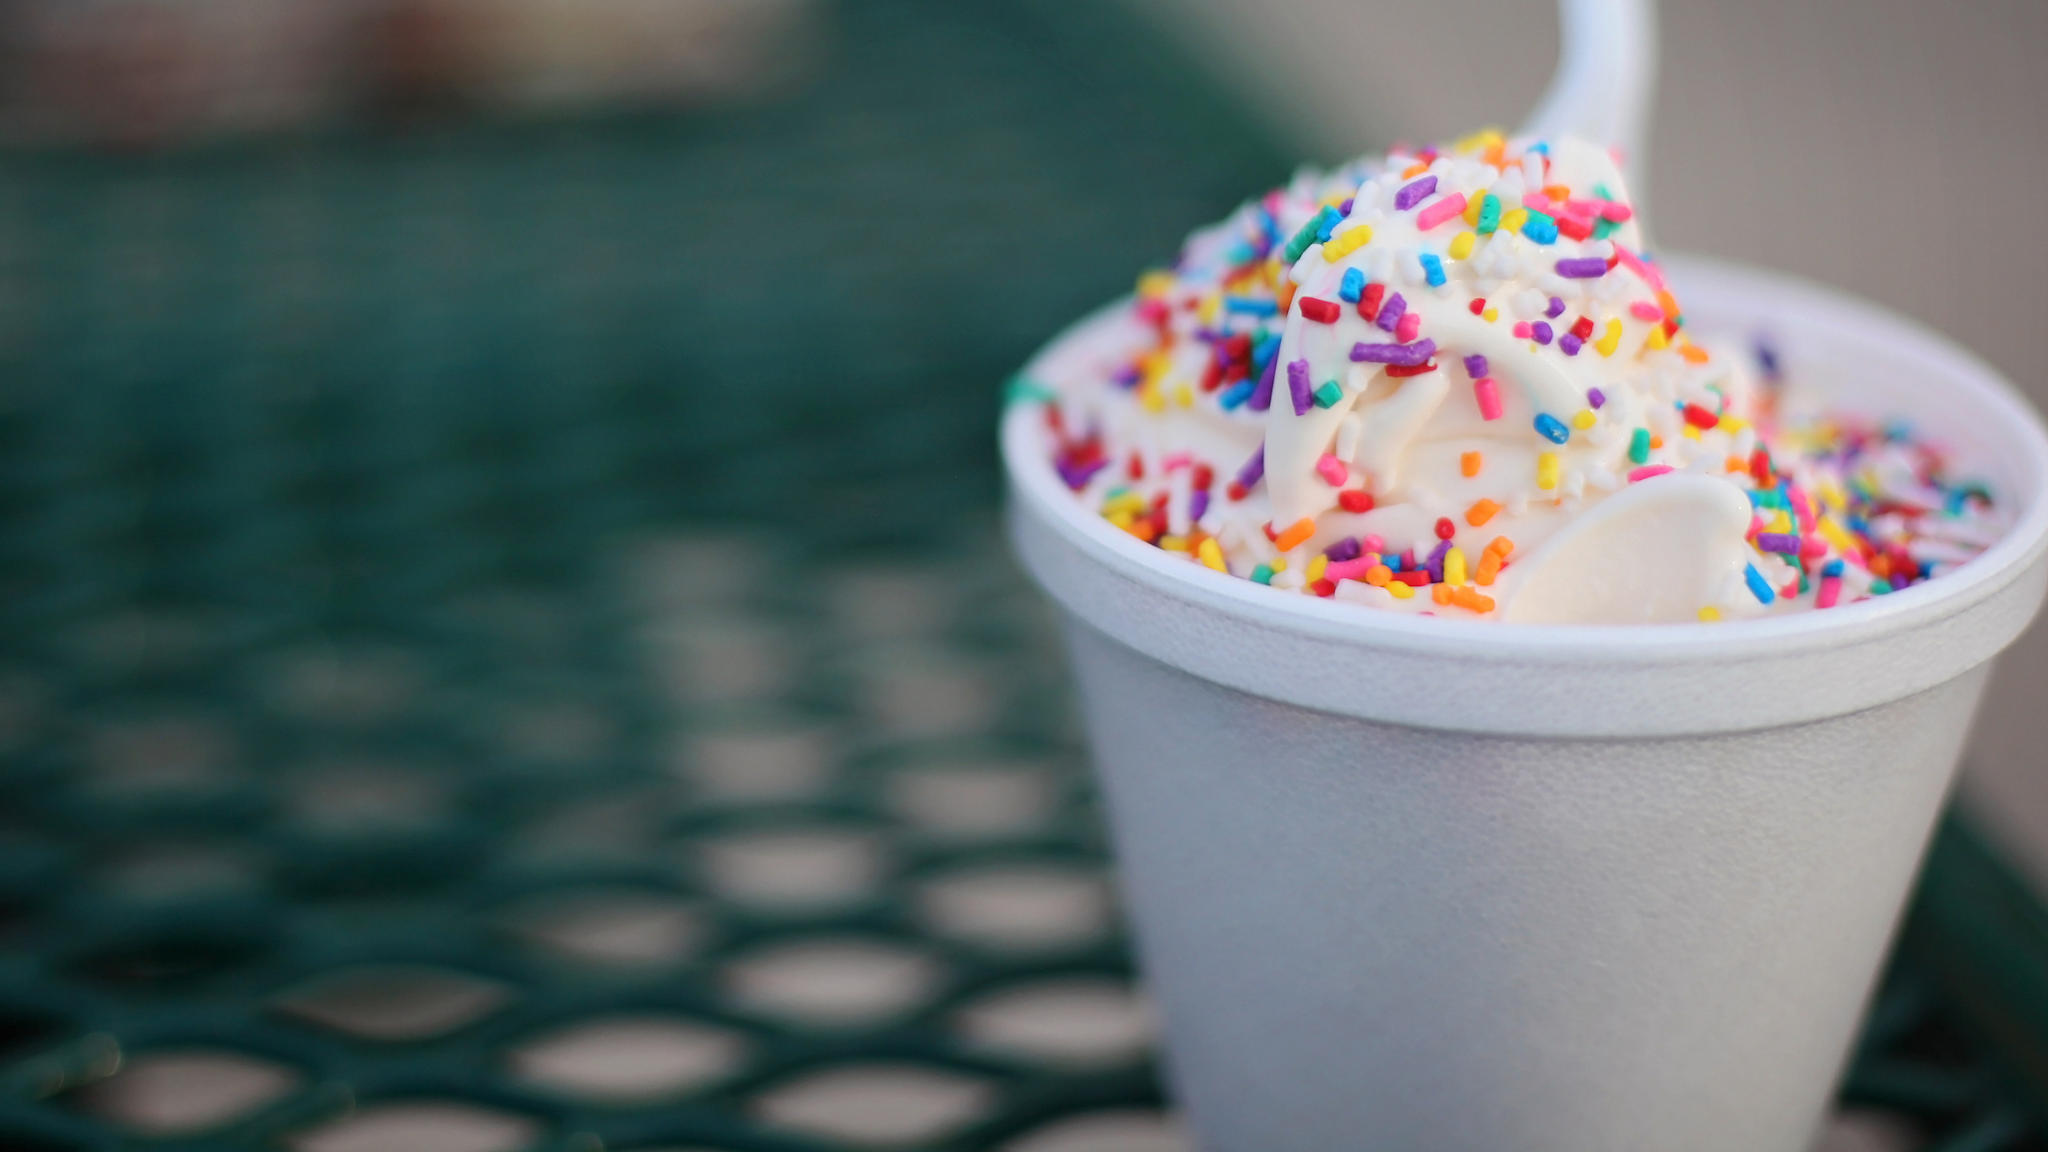 ice cream in a cup on a wire table. There are sprinkles on the ice cream and a plastic spoon in it.